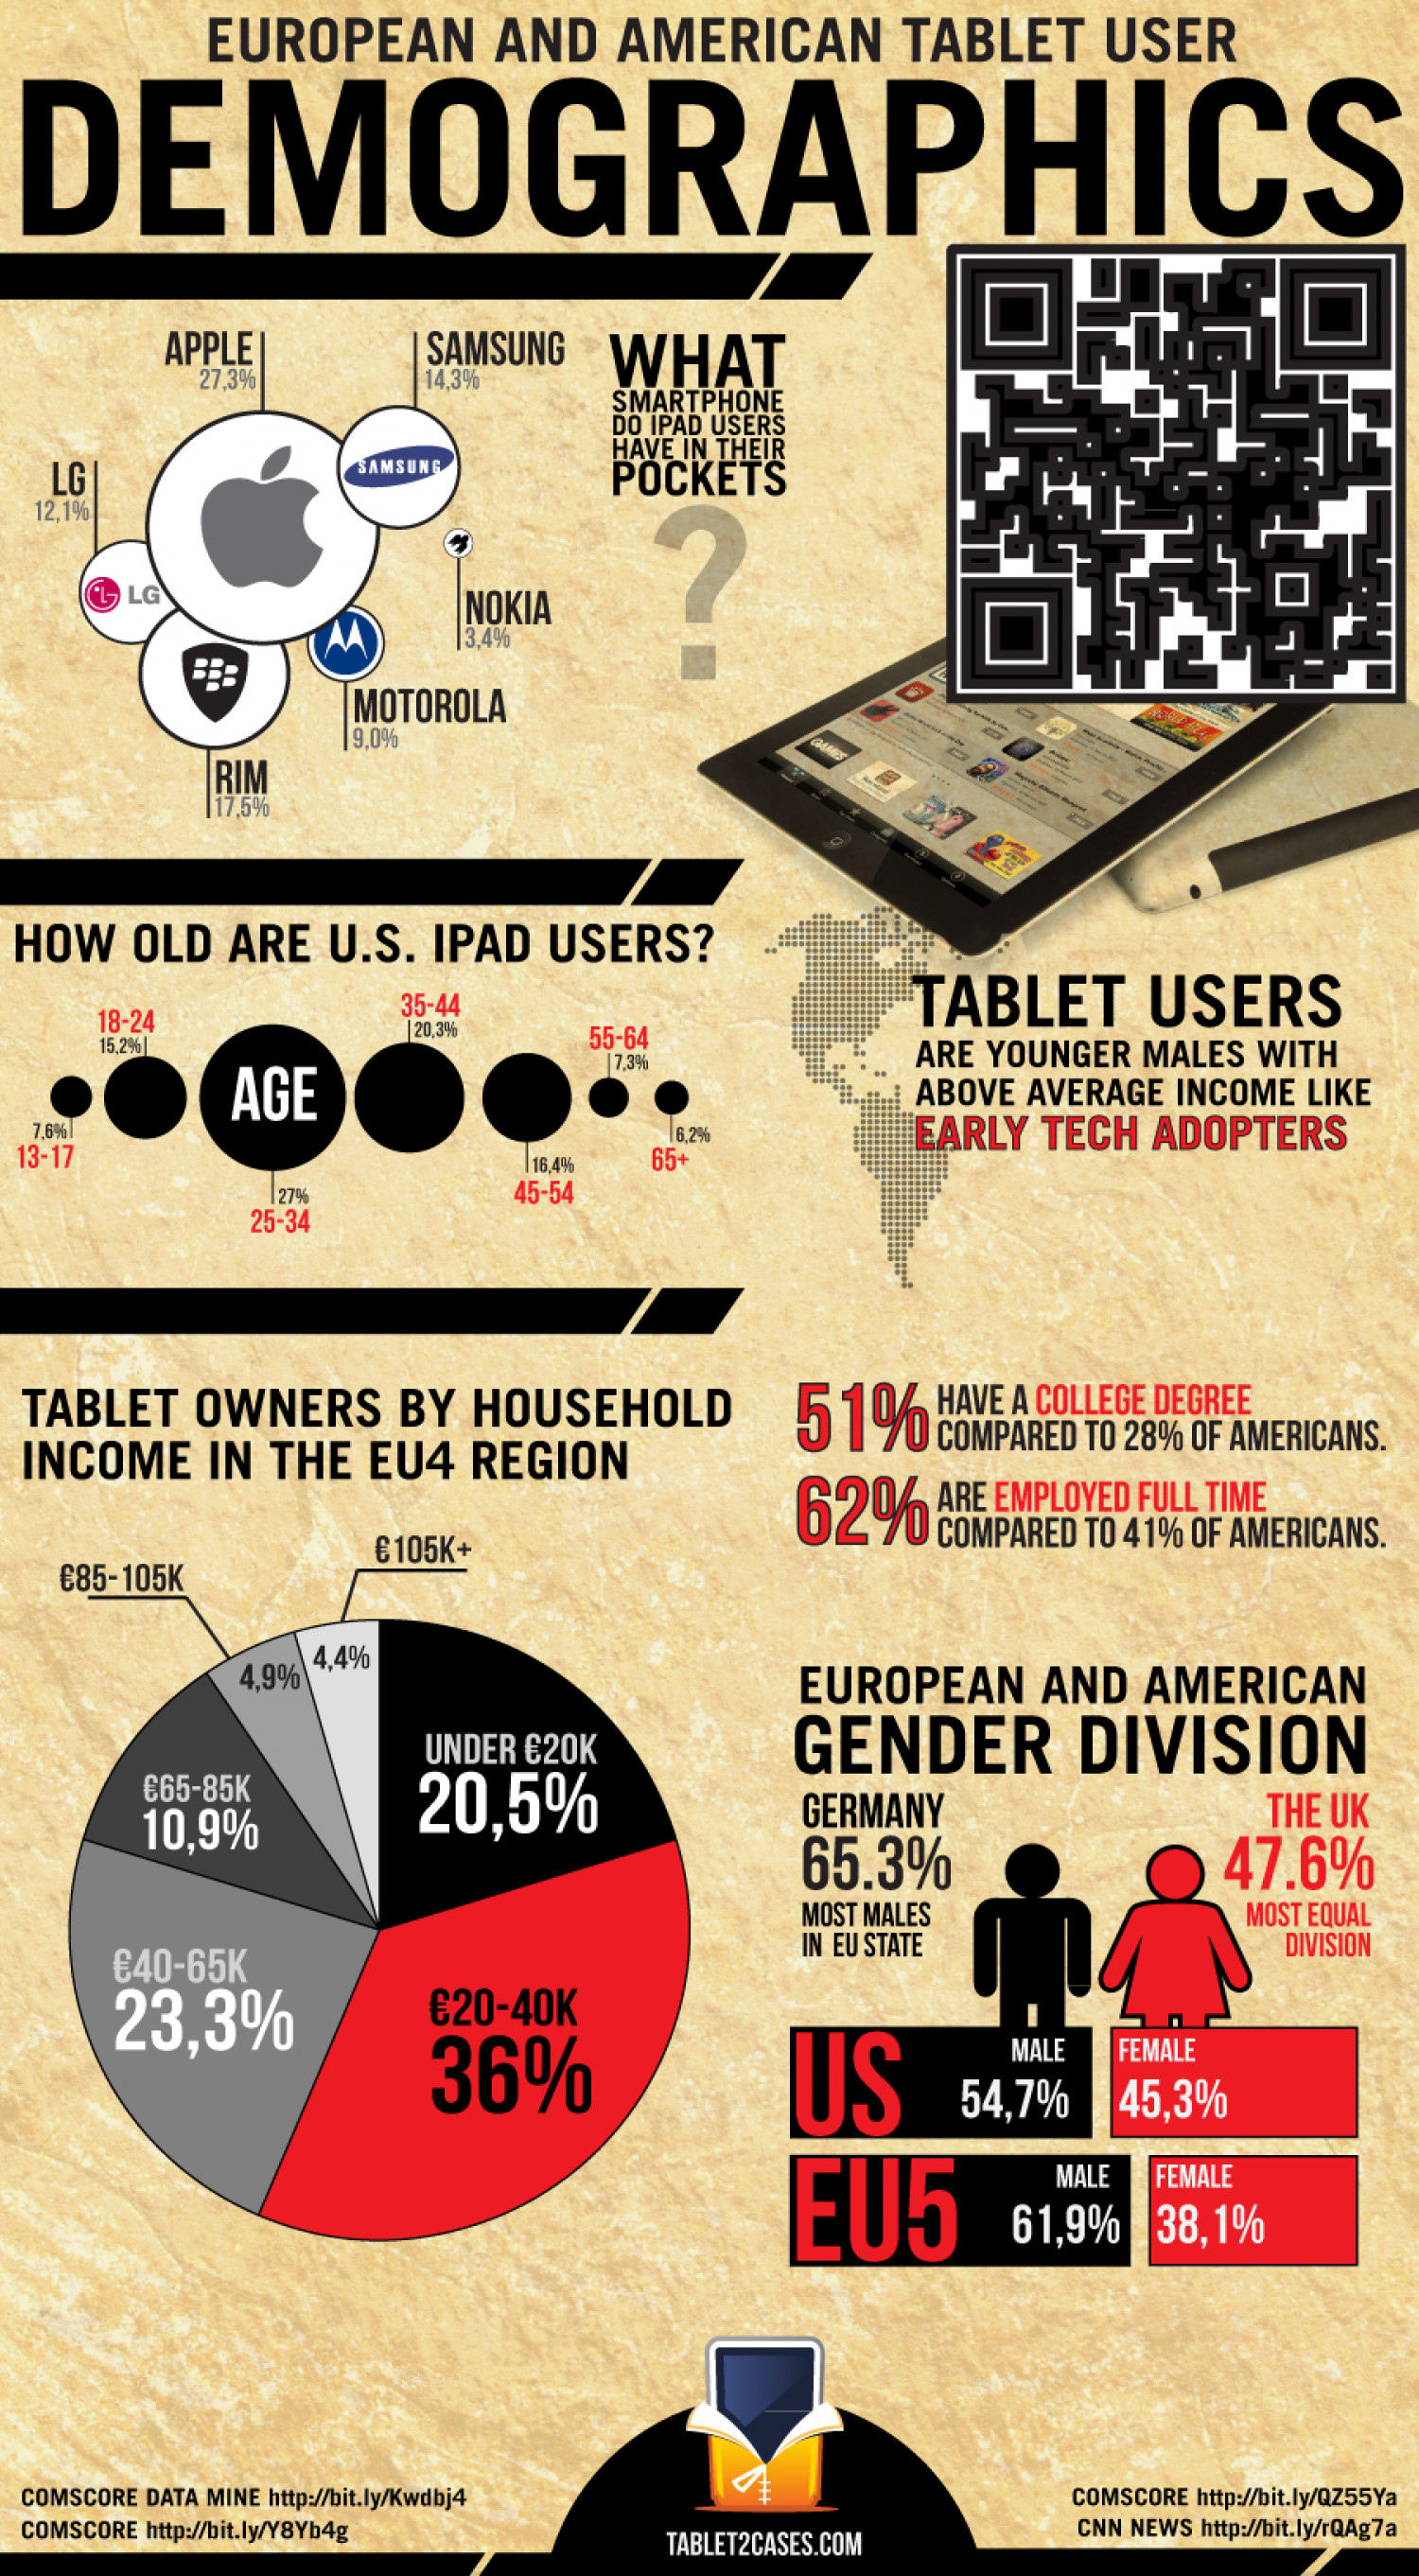 European and American Tablet User Demographics Infographic